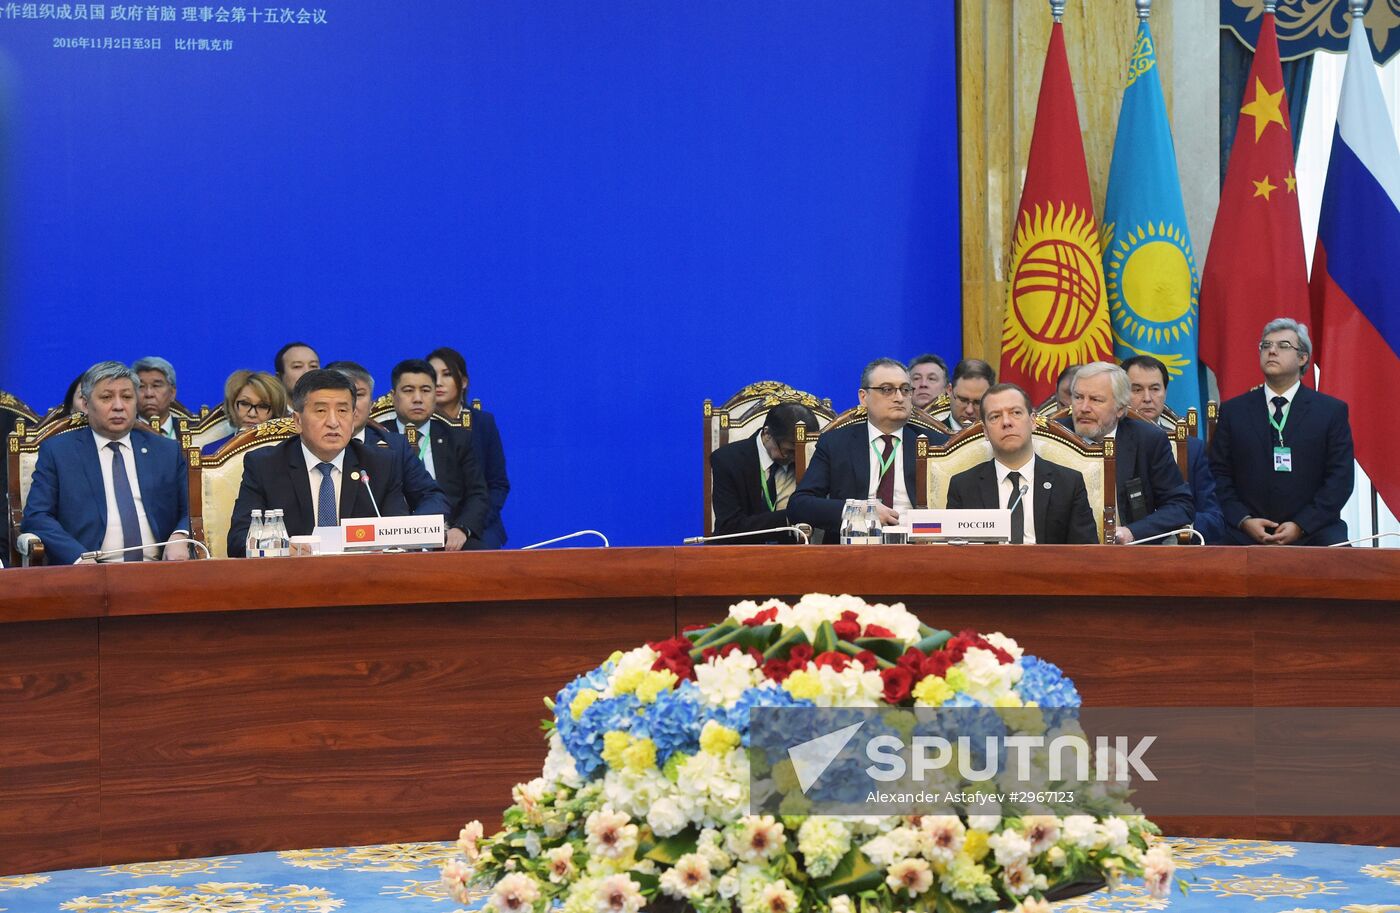 Russian Prime Minister Dmitry Medvedev's official visit to Kyrgyzstan